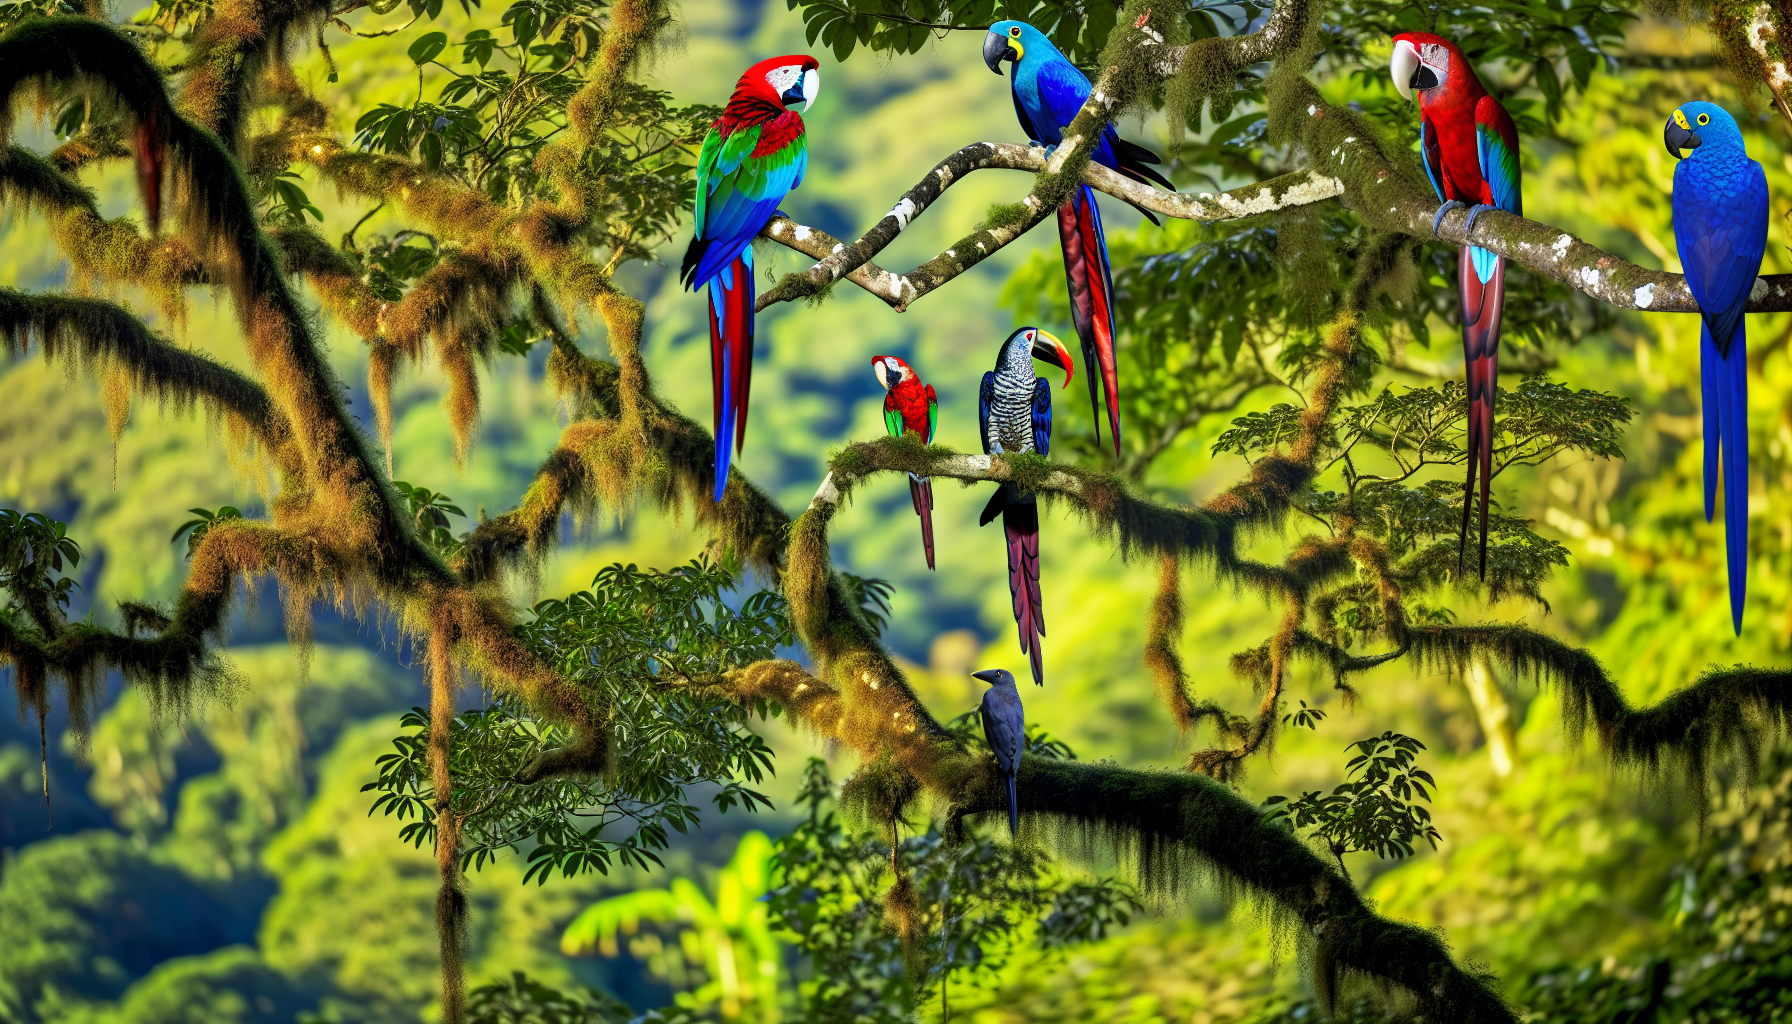 Tropical birds in Costa Rica during the dry season